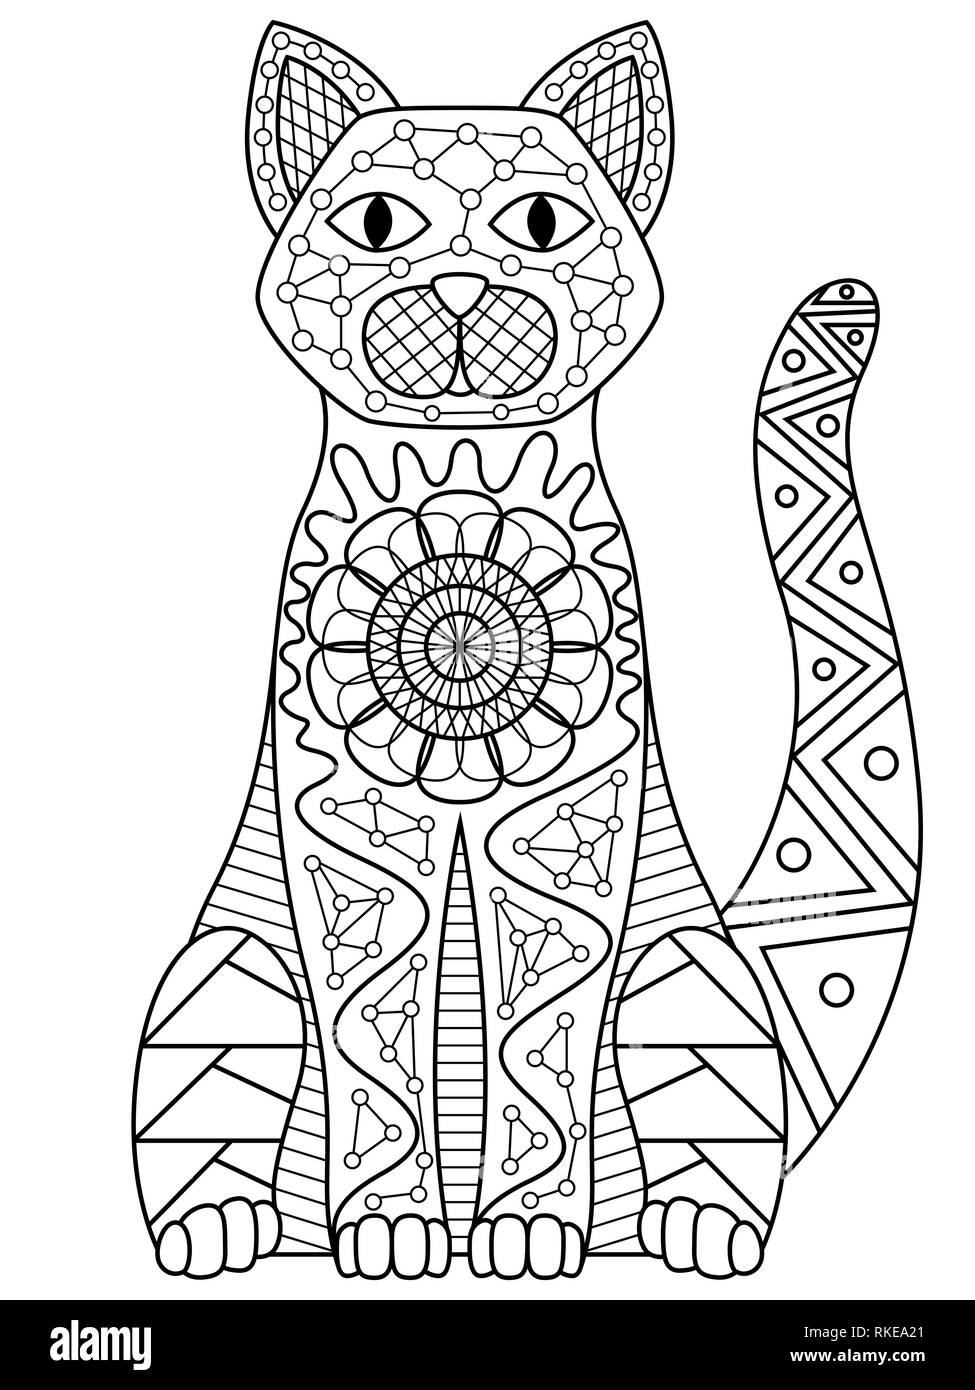 Black cat body contour decorated with various patterns, vector on the white background Stock Vector